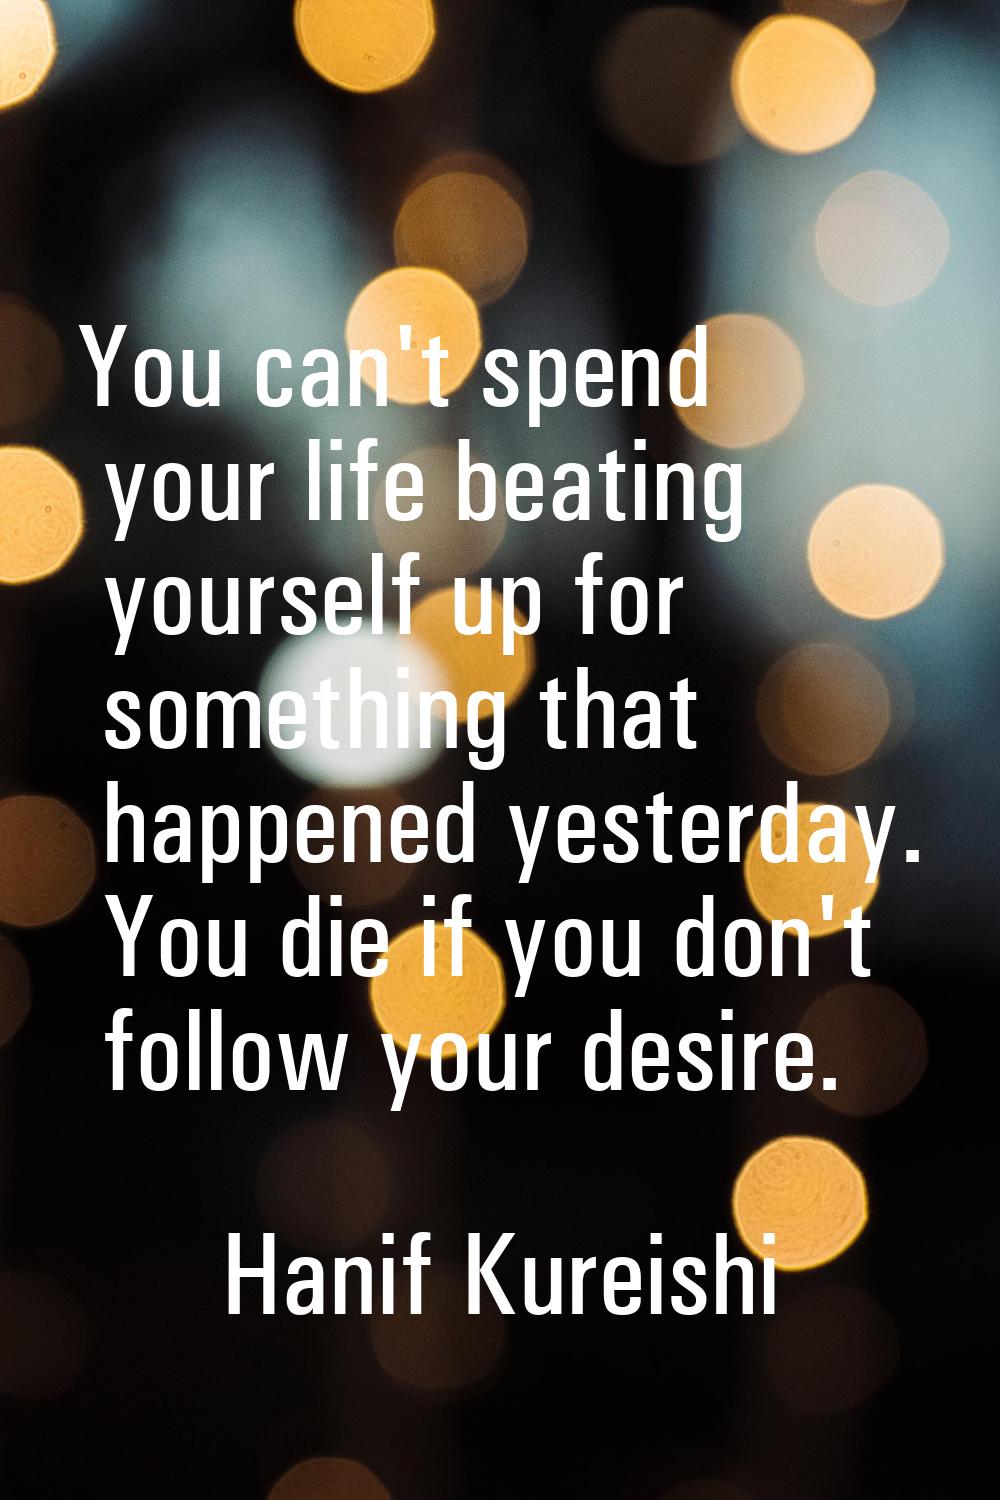 You can't spend your life beating yourself up for something that happened yesterday. You die if you